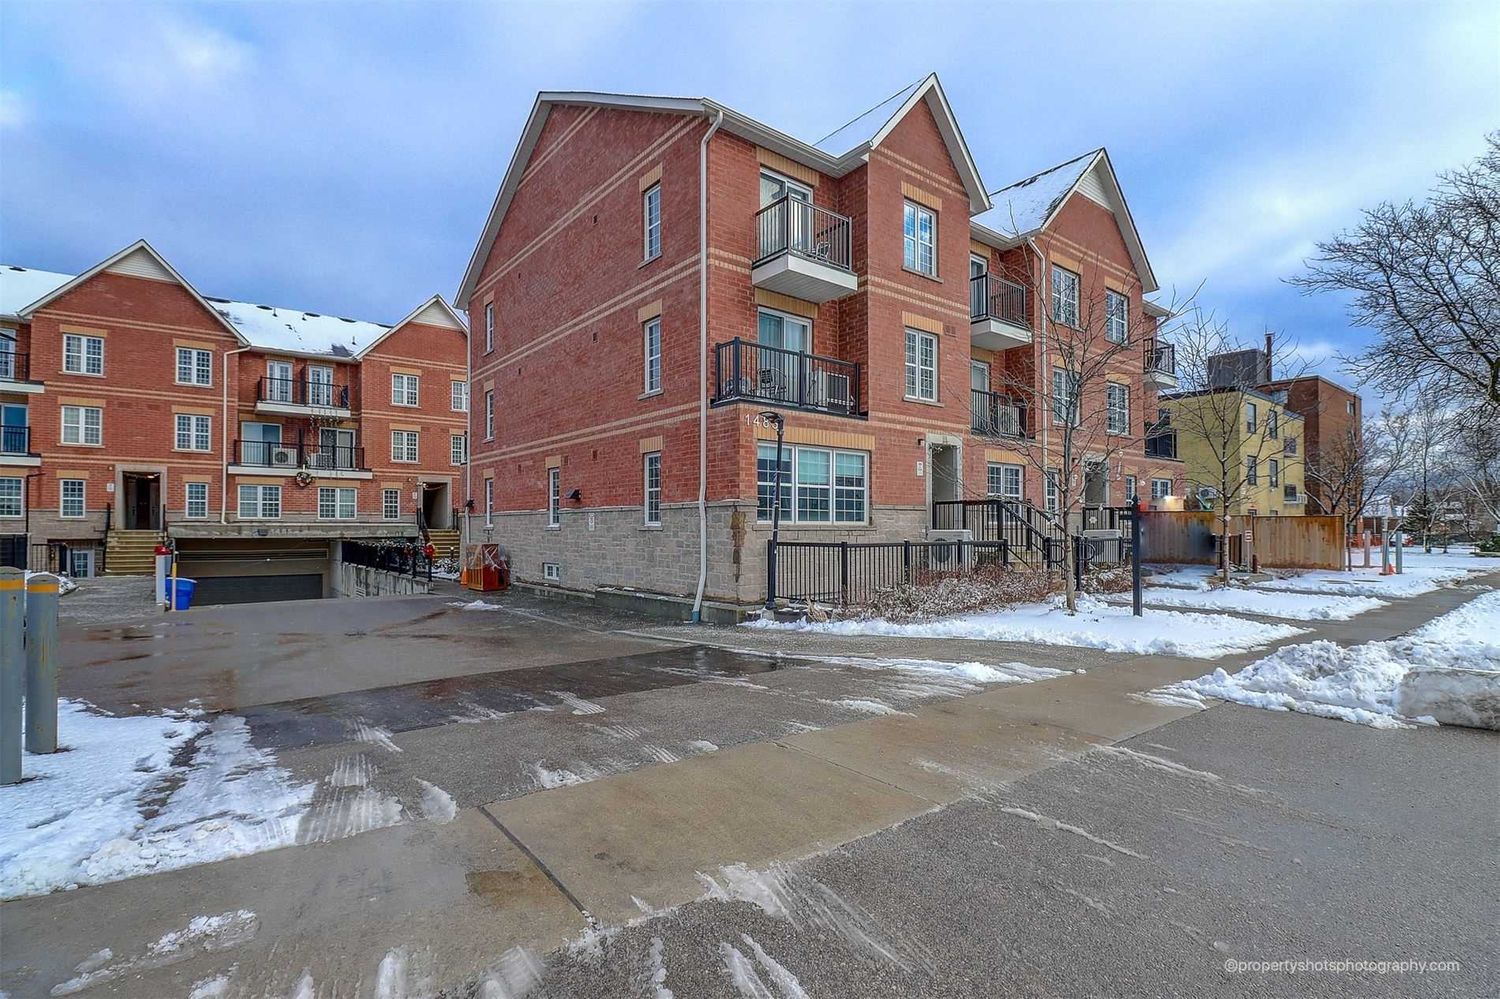 1483 Birchmount Road. Birchmount Gardens Townhomes is located in  Scarborough, Toronto - image #1 of 3